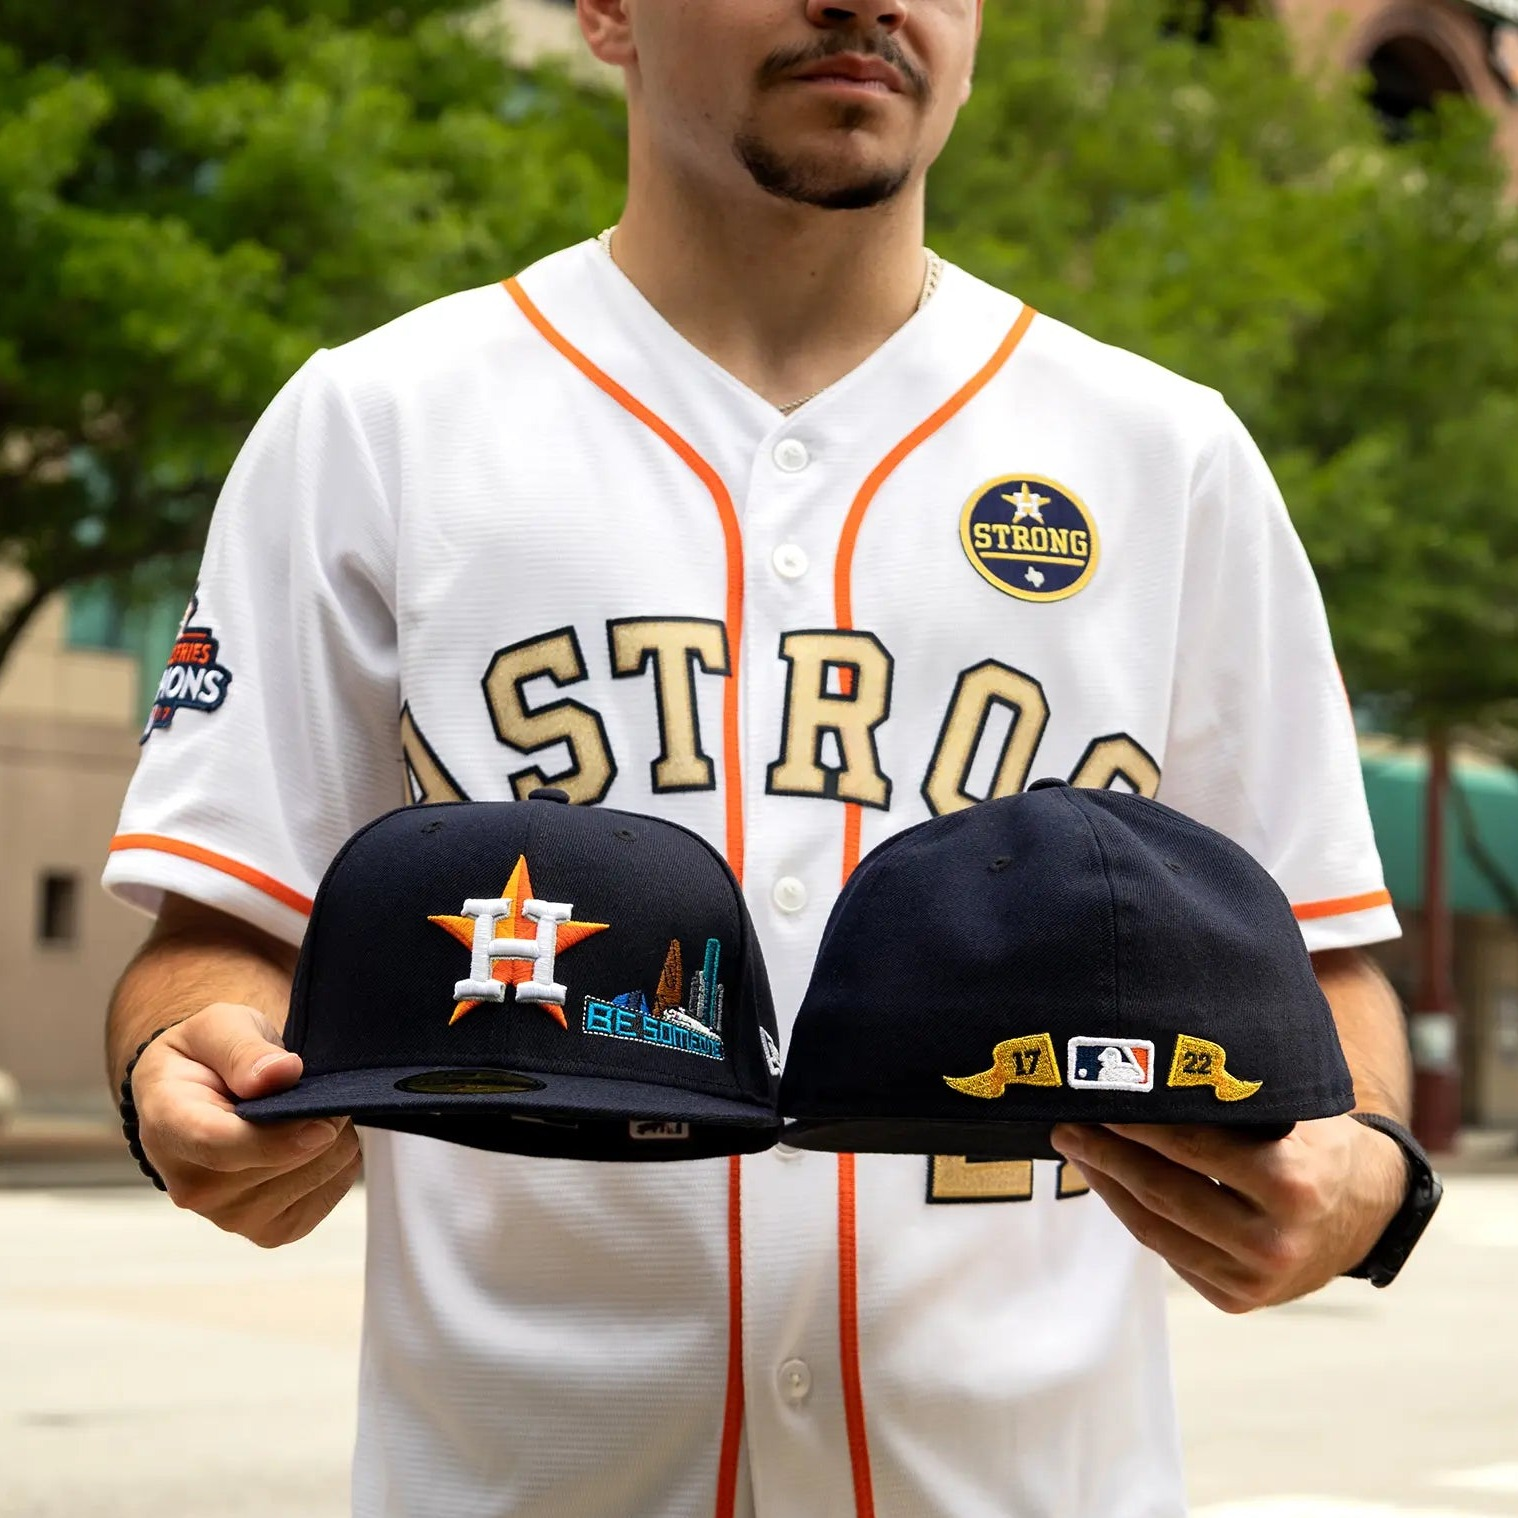 astros hat patch